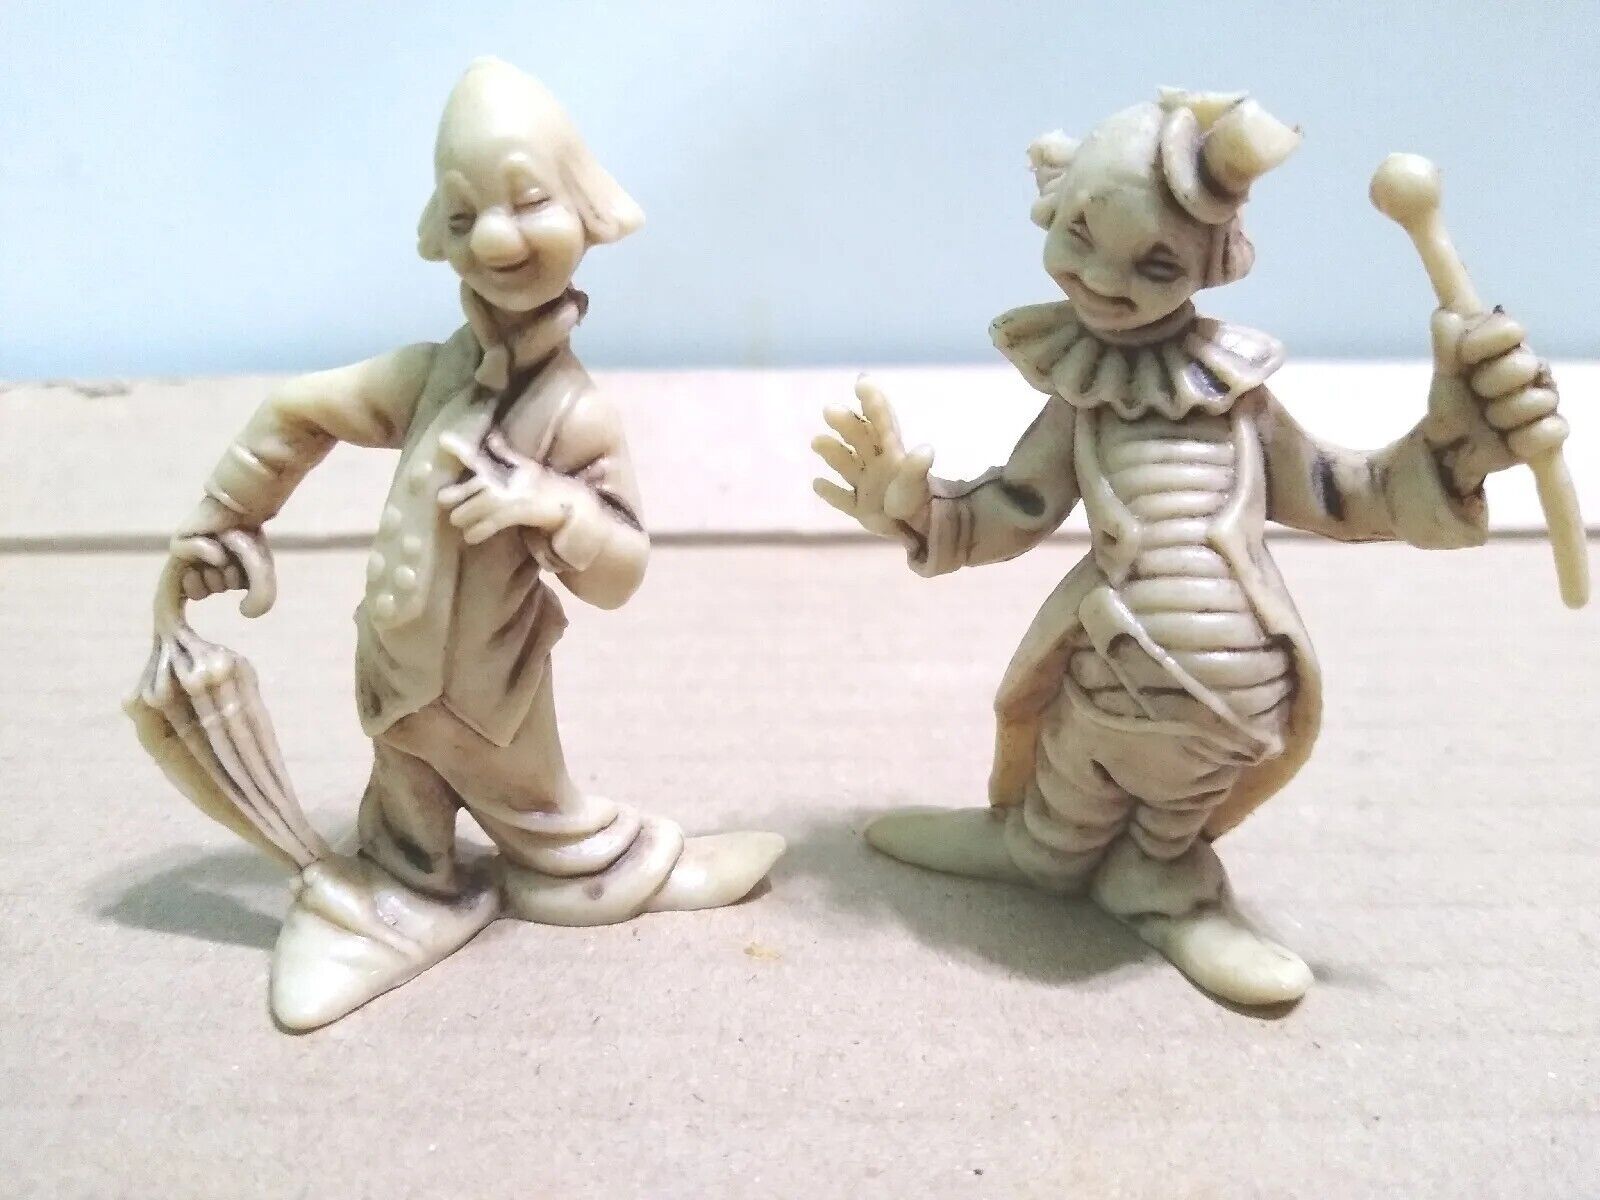 Vintage Plastic Toy Circus Clowns Lot of (2) Clown Figures Figurines